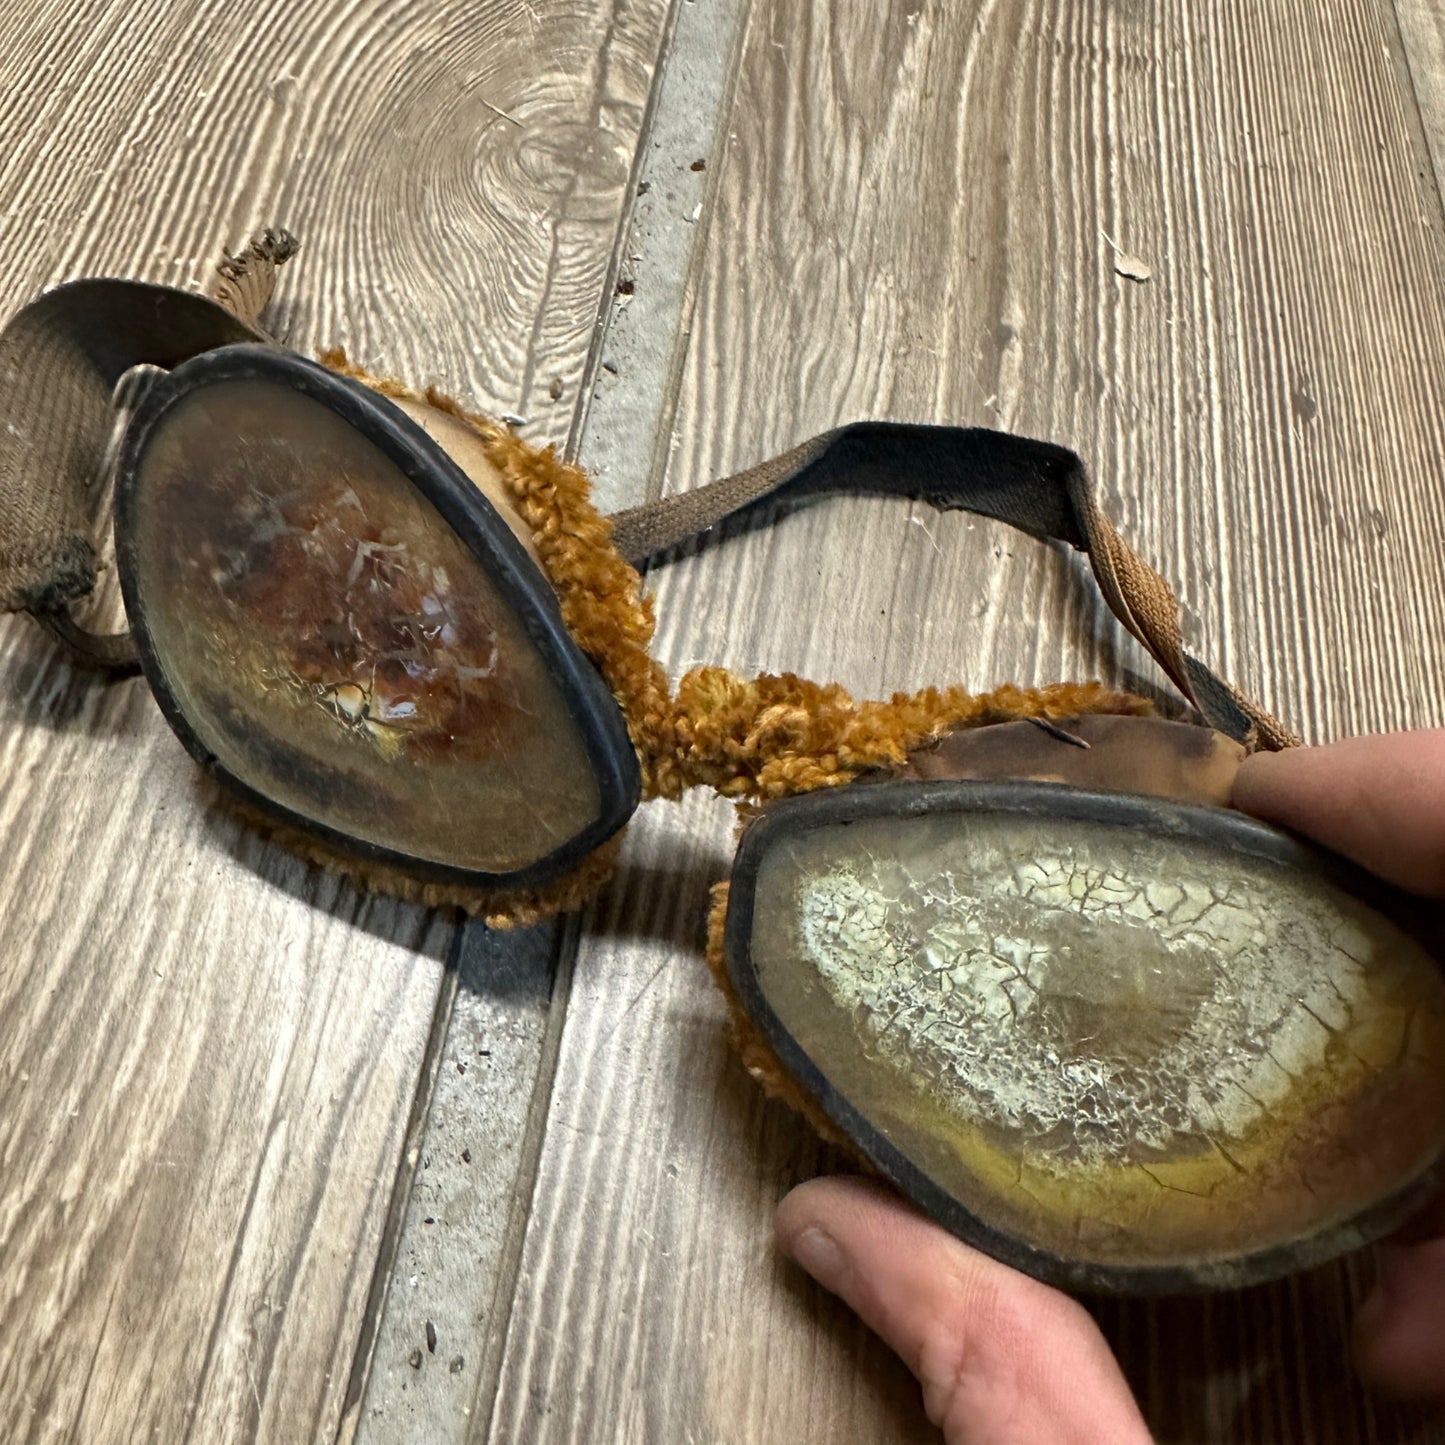 Antique Huge Lot (7) 1920s-30s Motorcycle Riding Glasses Goggles